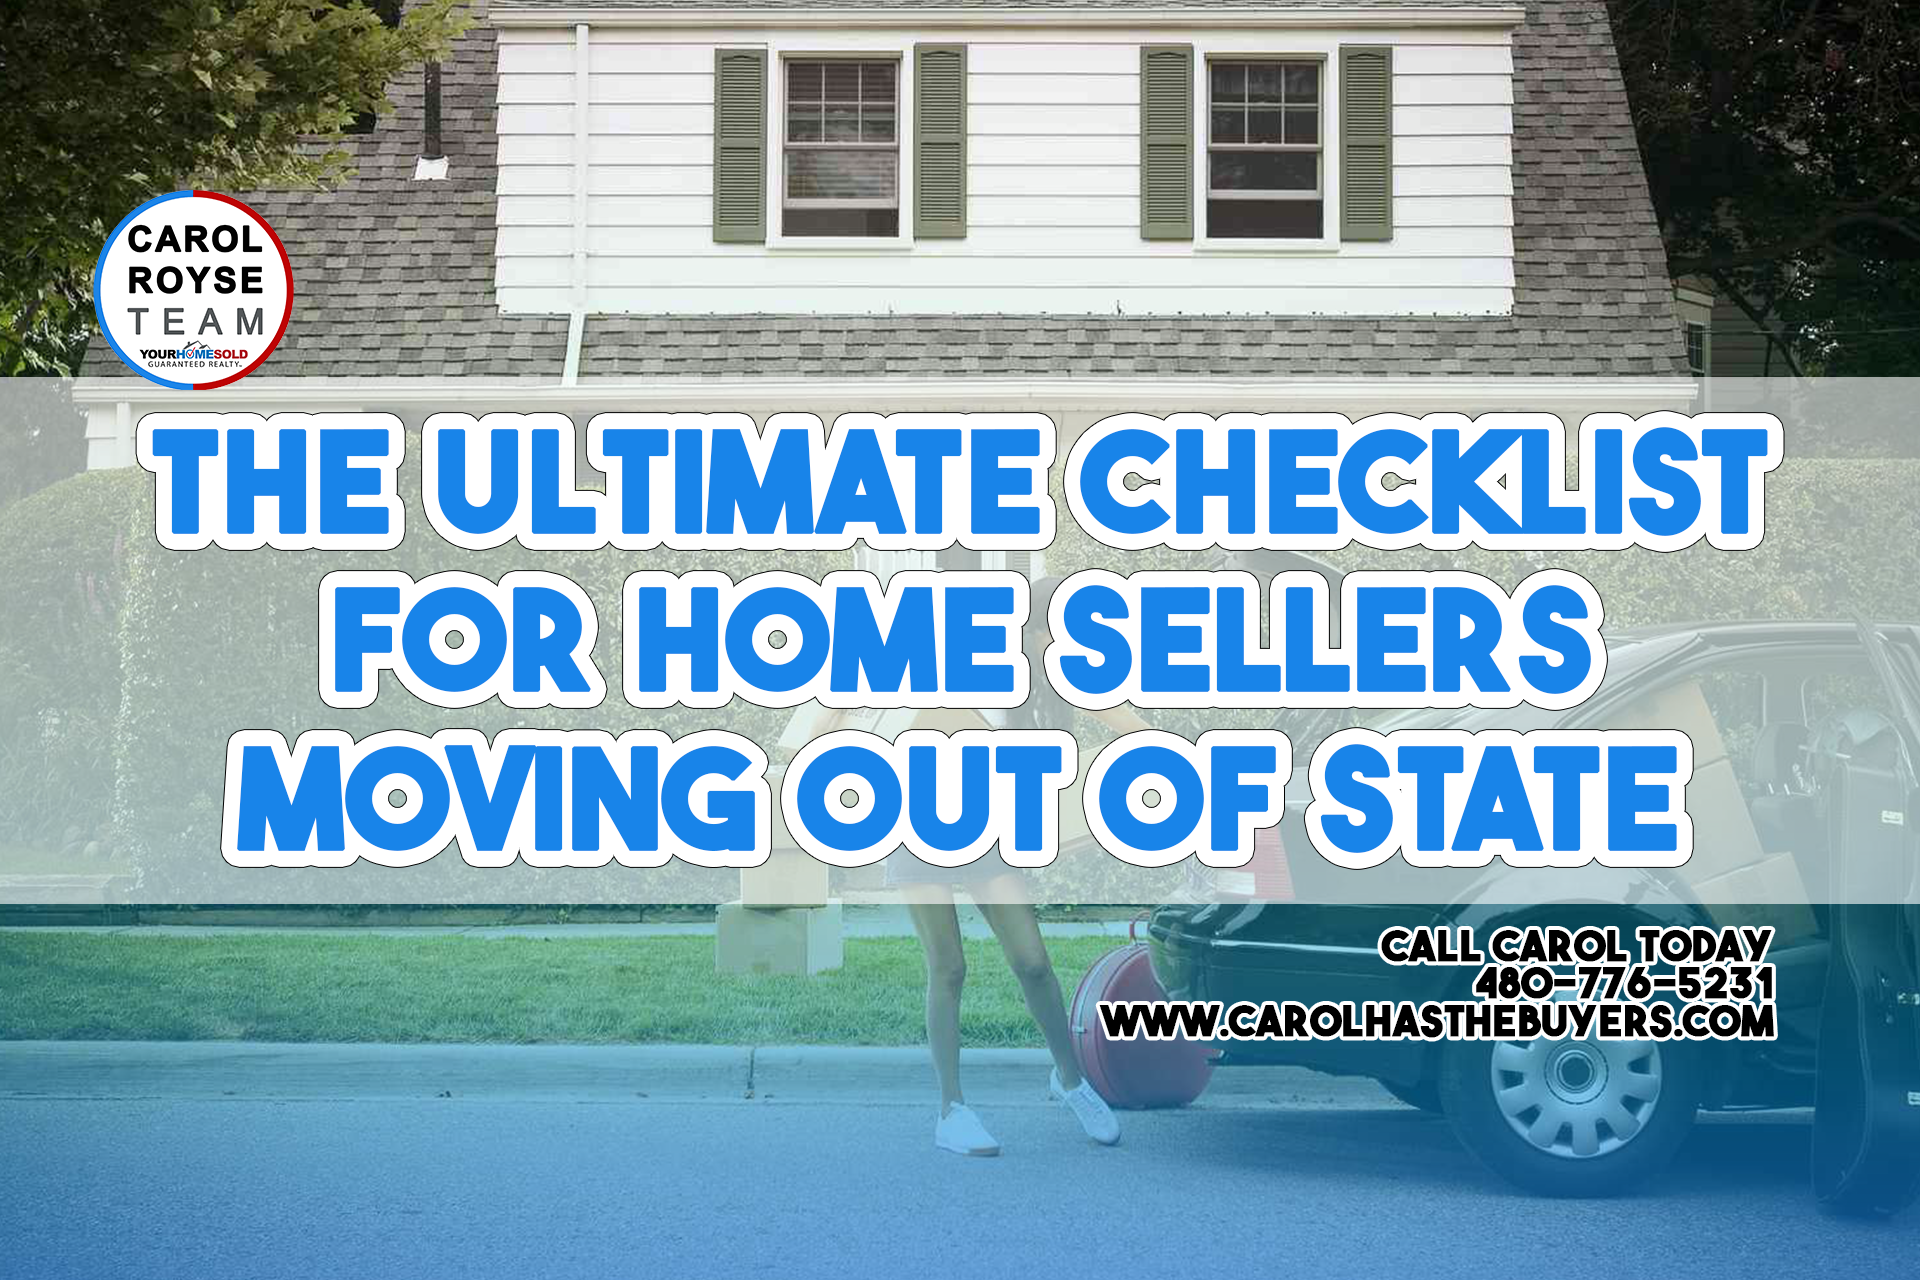 The Ultimate Checklist for Home Sellers Moving Out of State